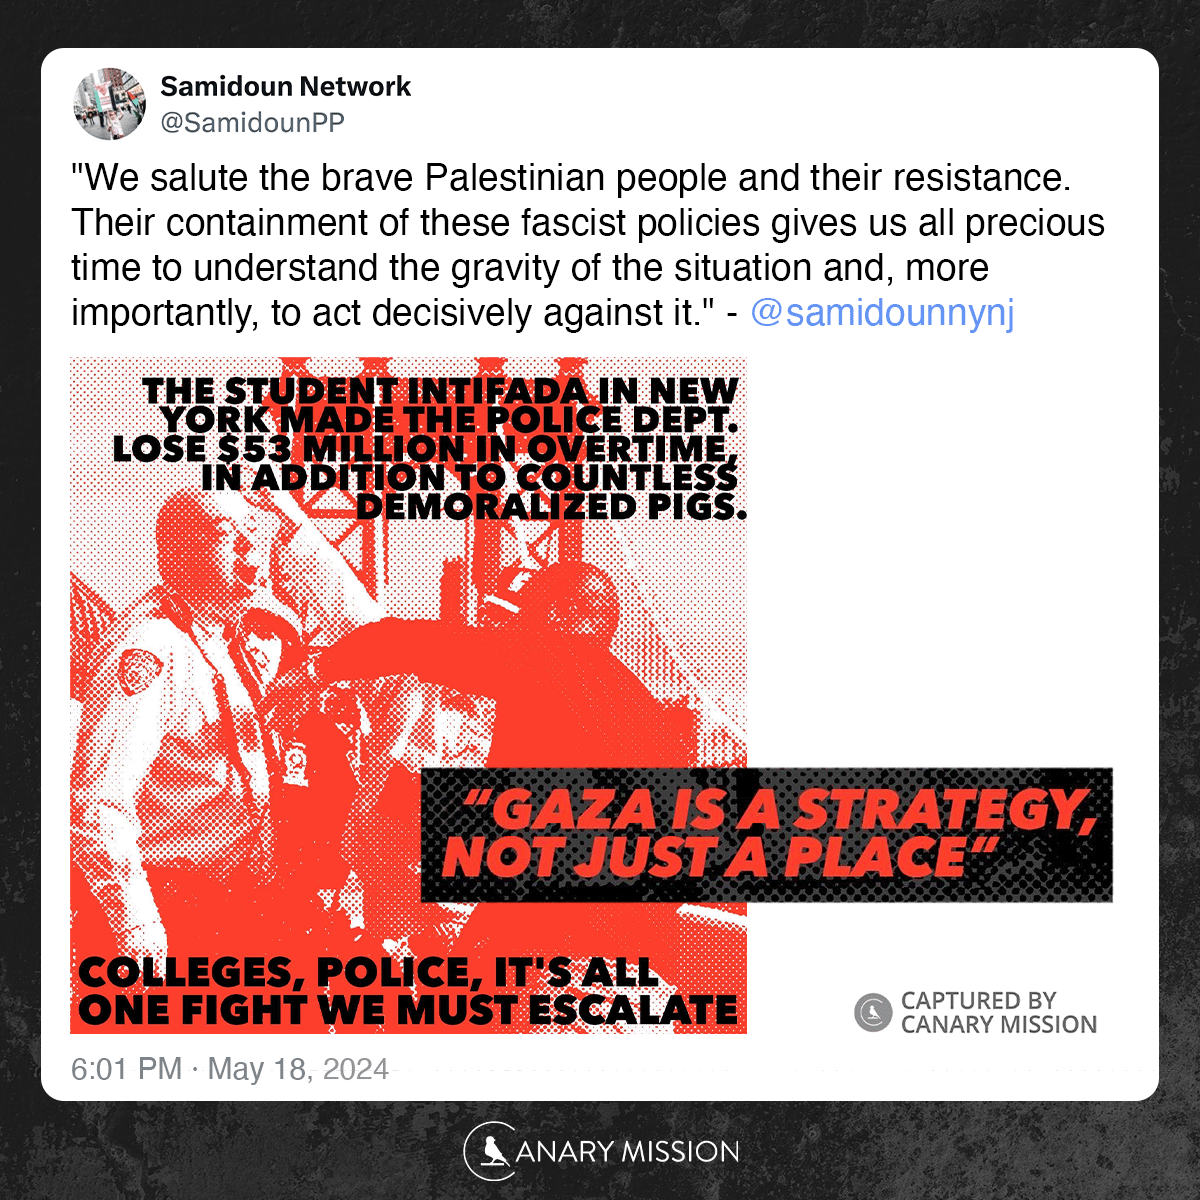 'Gaza is a strategy, not just a place' from @SamidounPP, seen here bragging about their protests costing the NYPD $53 million. Samidoun, an NGO that operates as an arm of the PFLP, would like to see the 'strategy' of Gaza, i.e. Oct. 7, all over the world. canarymission.org/organization/S…